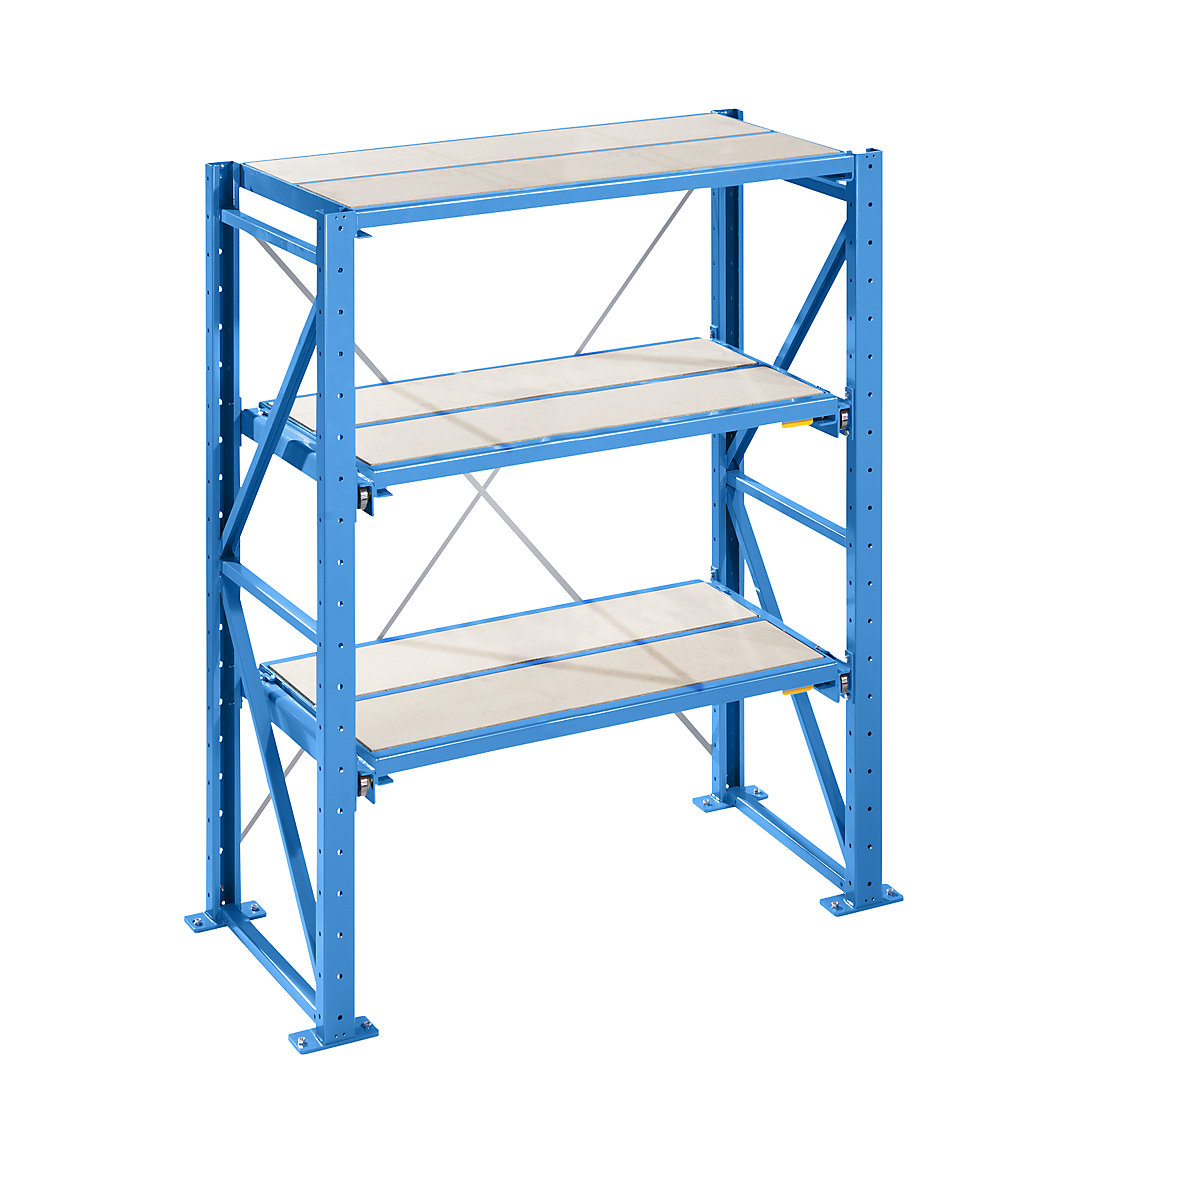 Heavy Duty Pull Out Shelving Unit, Bolt Free Shelving System